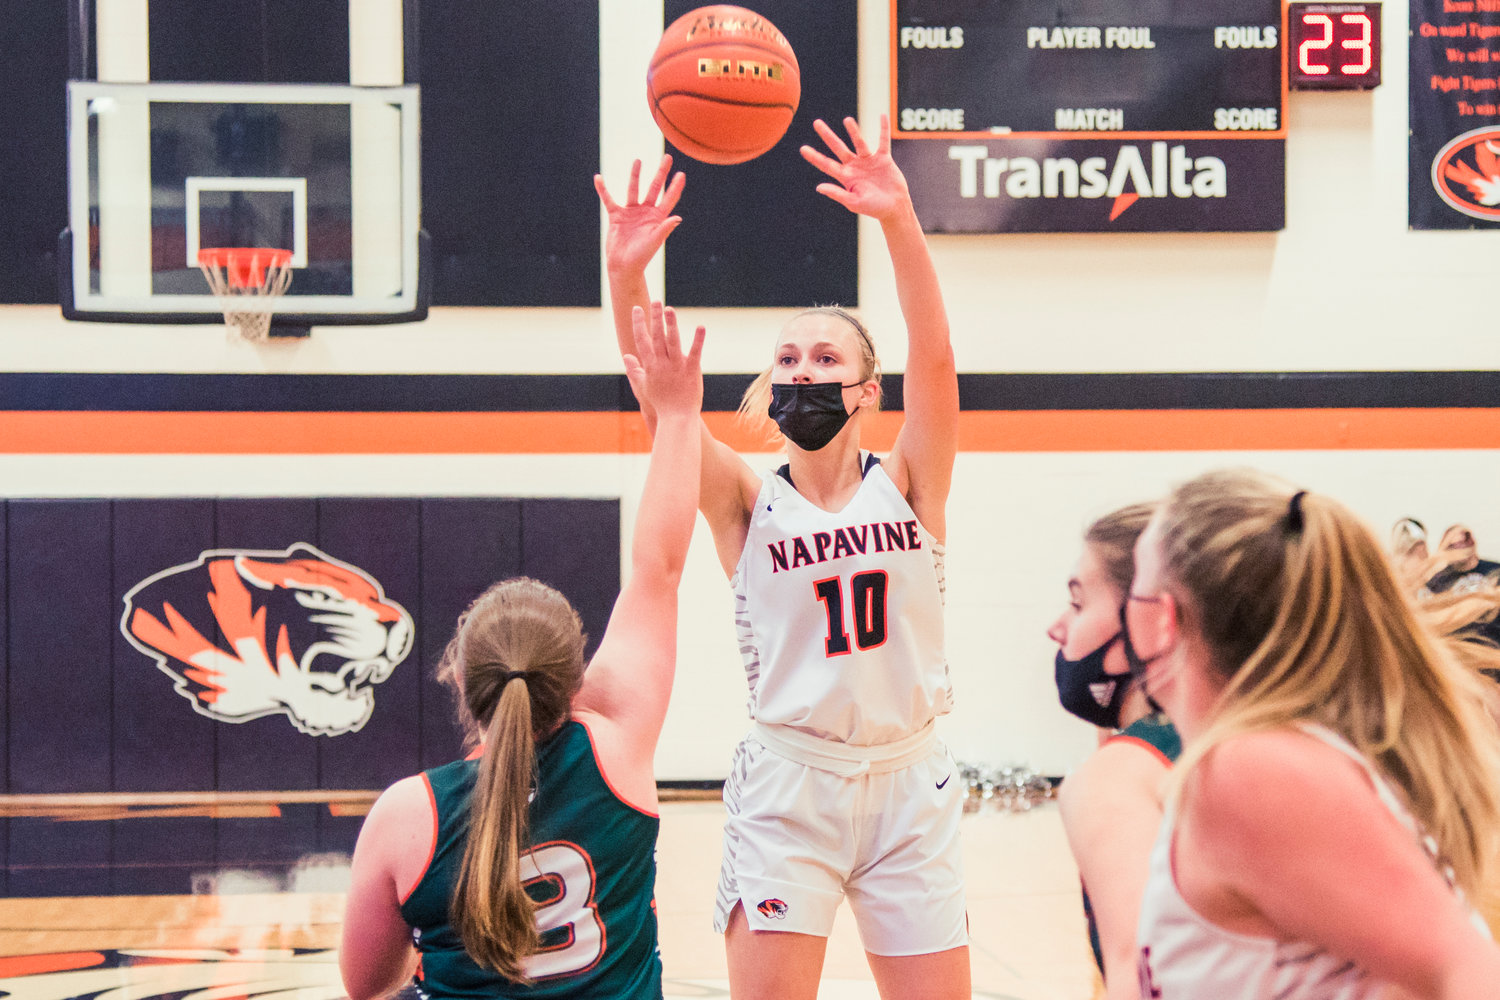 Napavine's Keira O'Neil (10) makes an outside shot during a game against the Timberwolves played Tuesday evening.